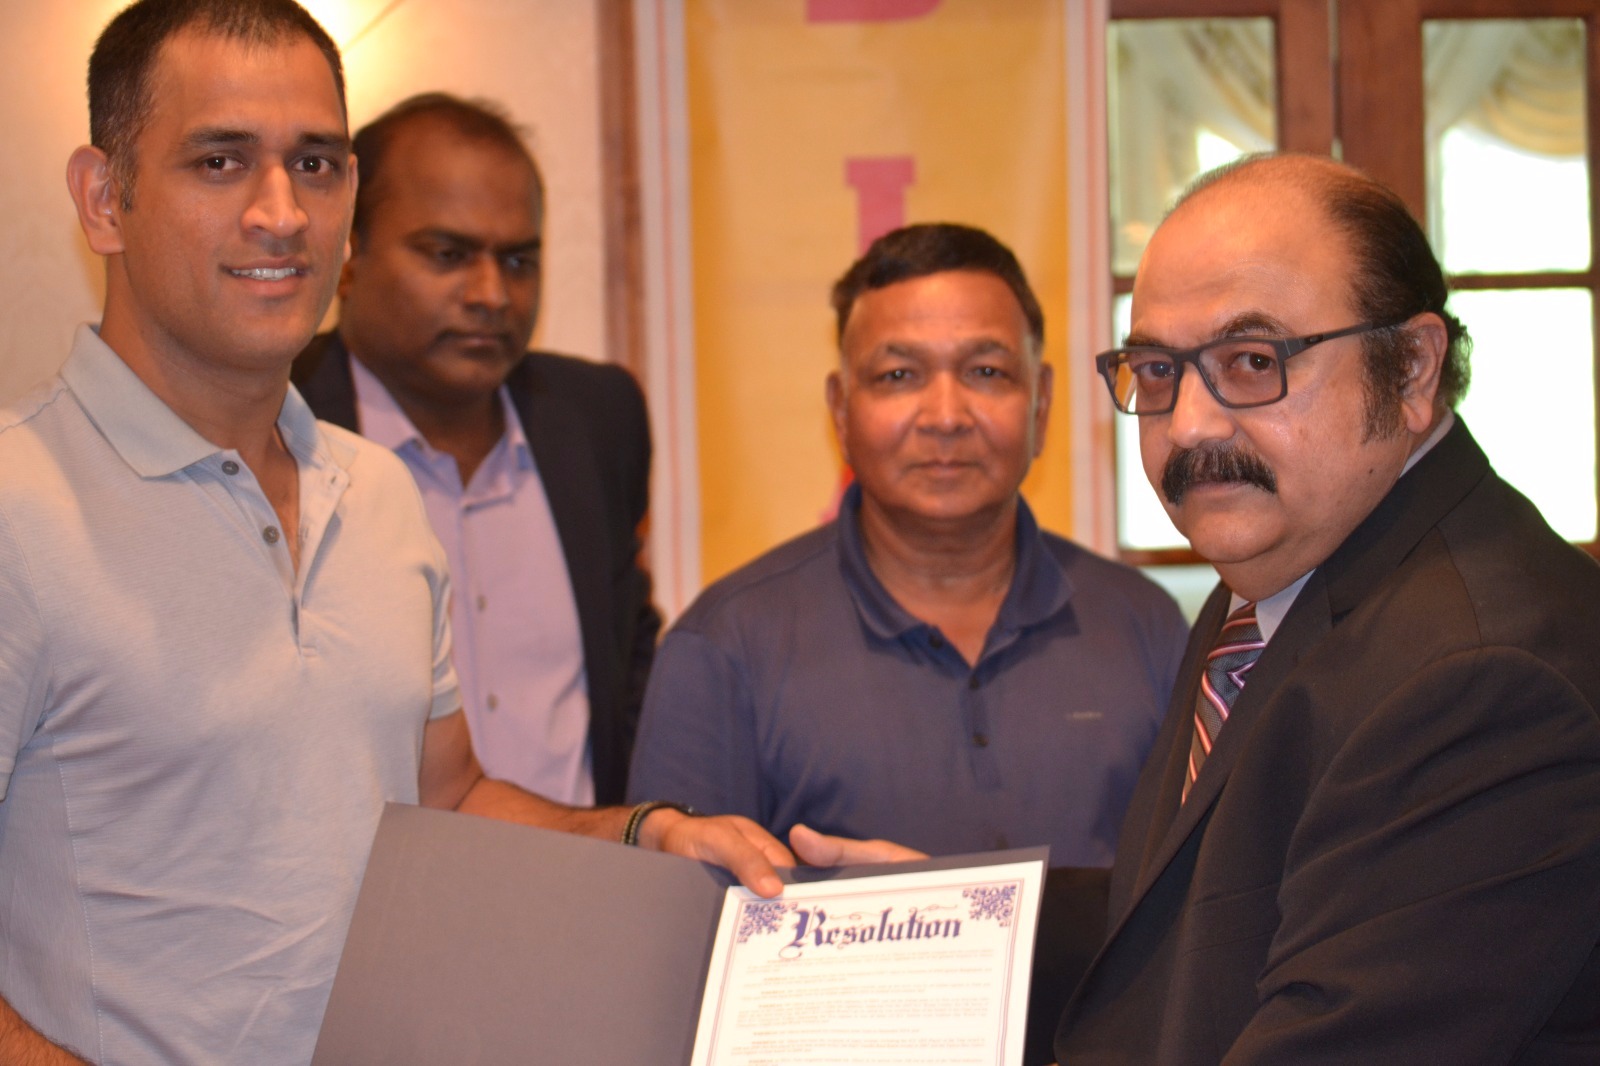 Atul Huckoo, President, Edison Cricket Club, presented a proclamation to Mahendra Singh Dhoni, at the Country Club, in Toms River, New Jersey.